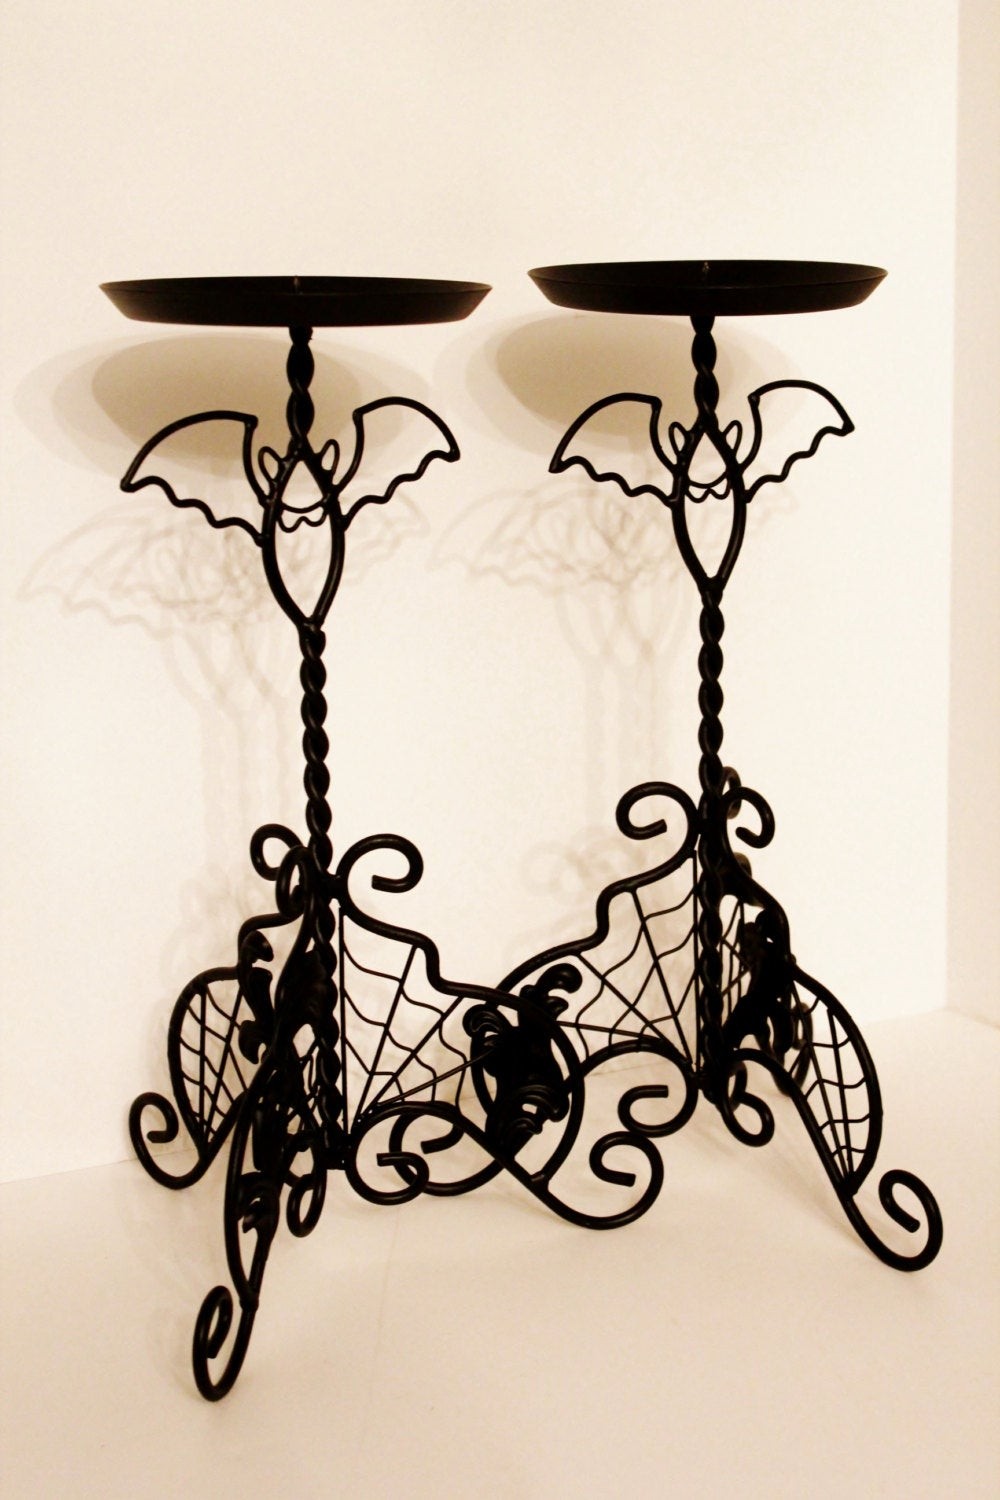 Large black wrought iron candle holders by vintagecharmers